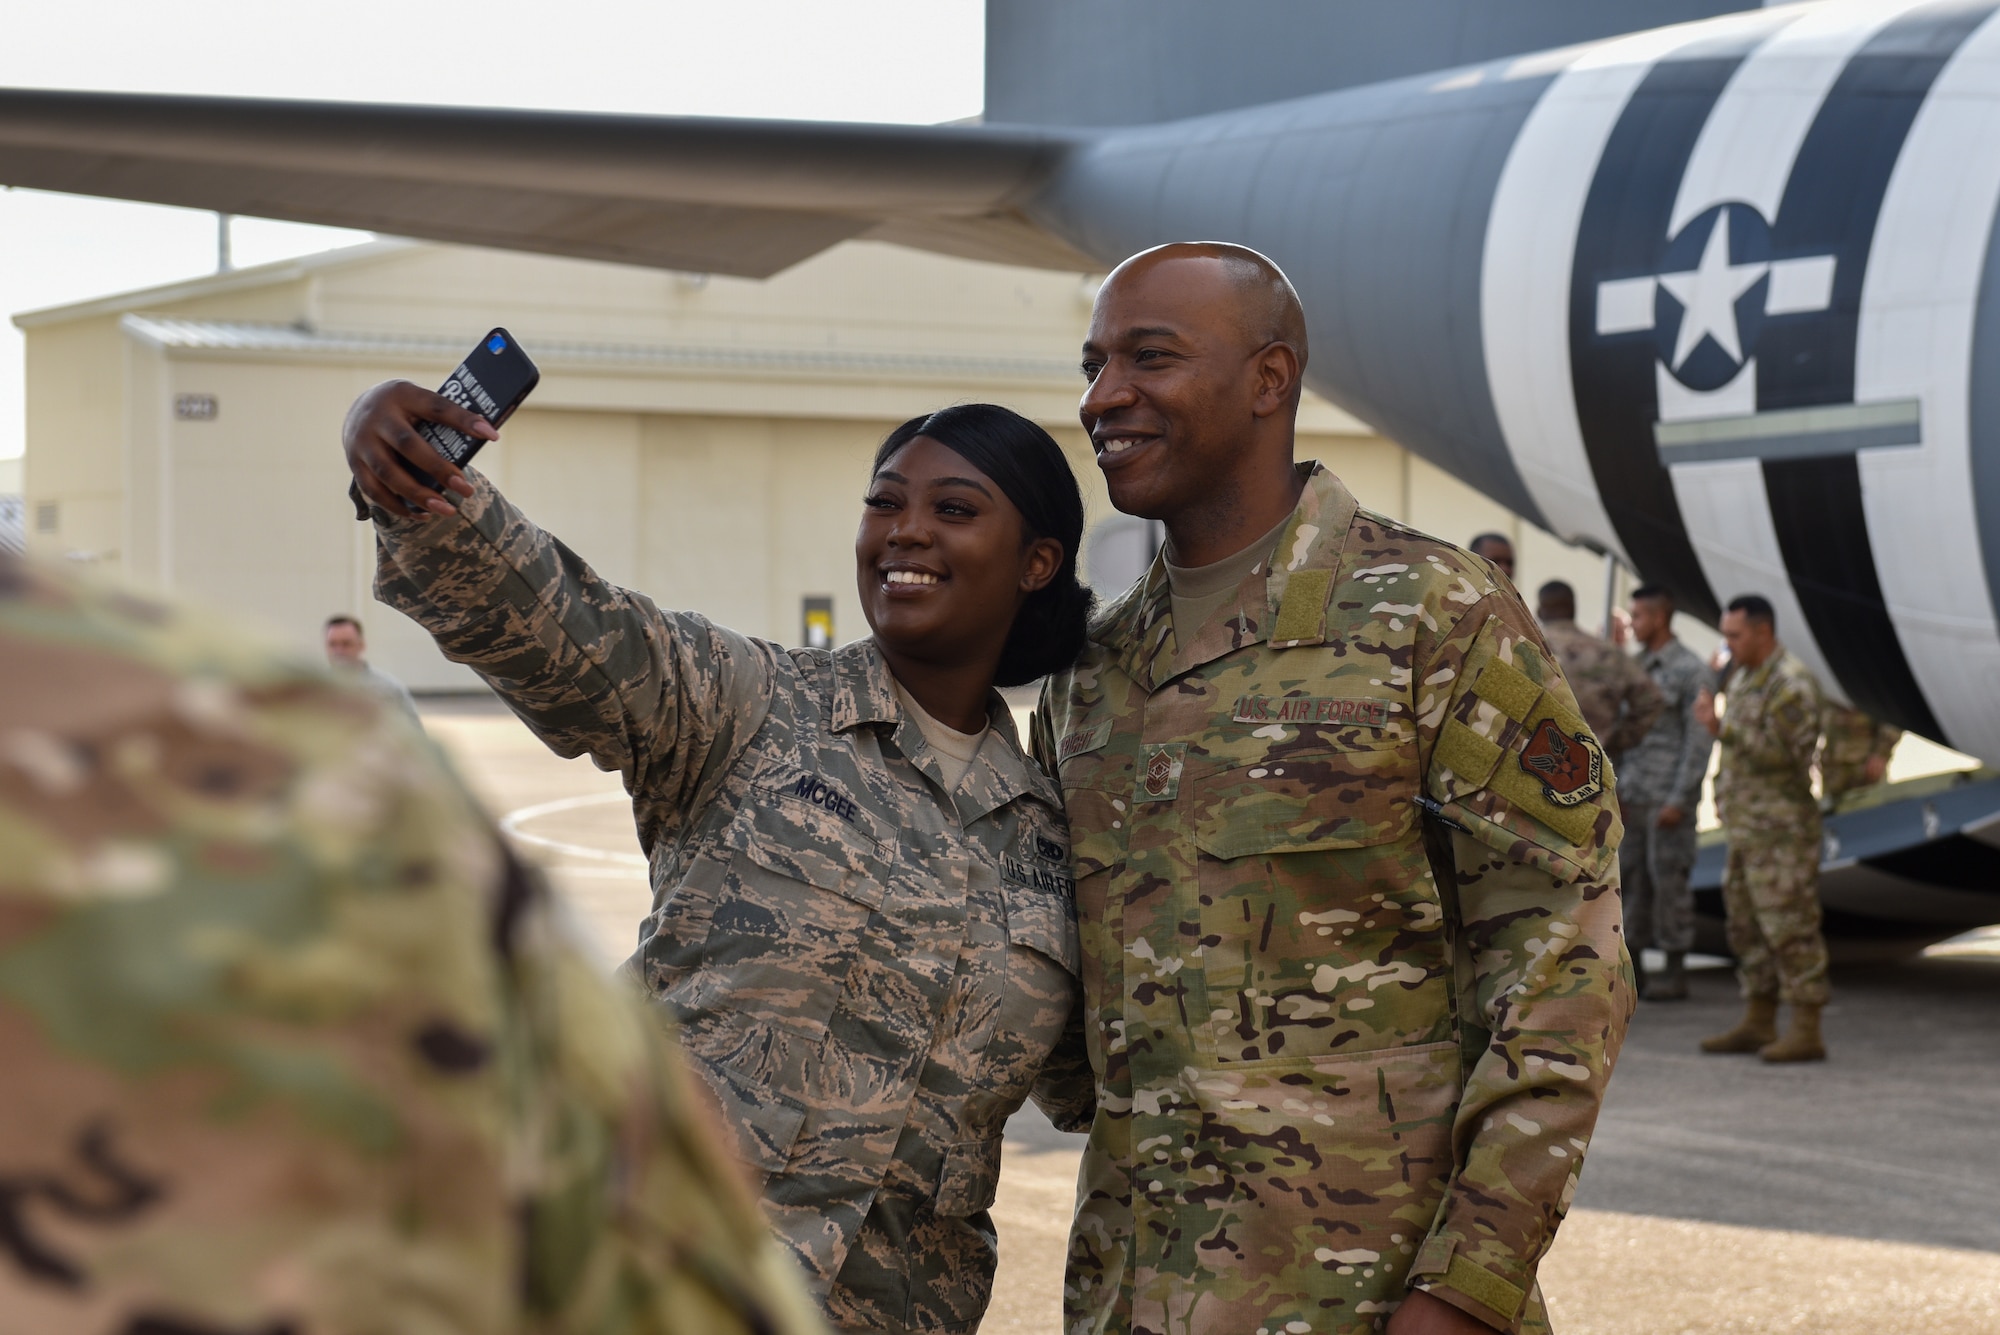 An Airman takes a selfie with Chief Wright